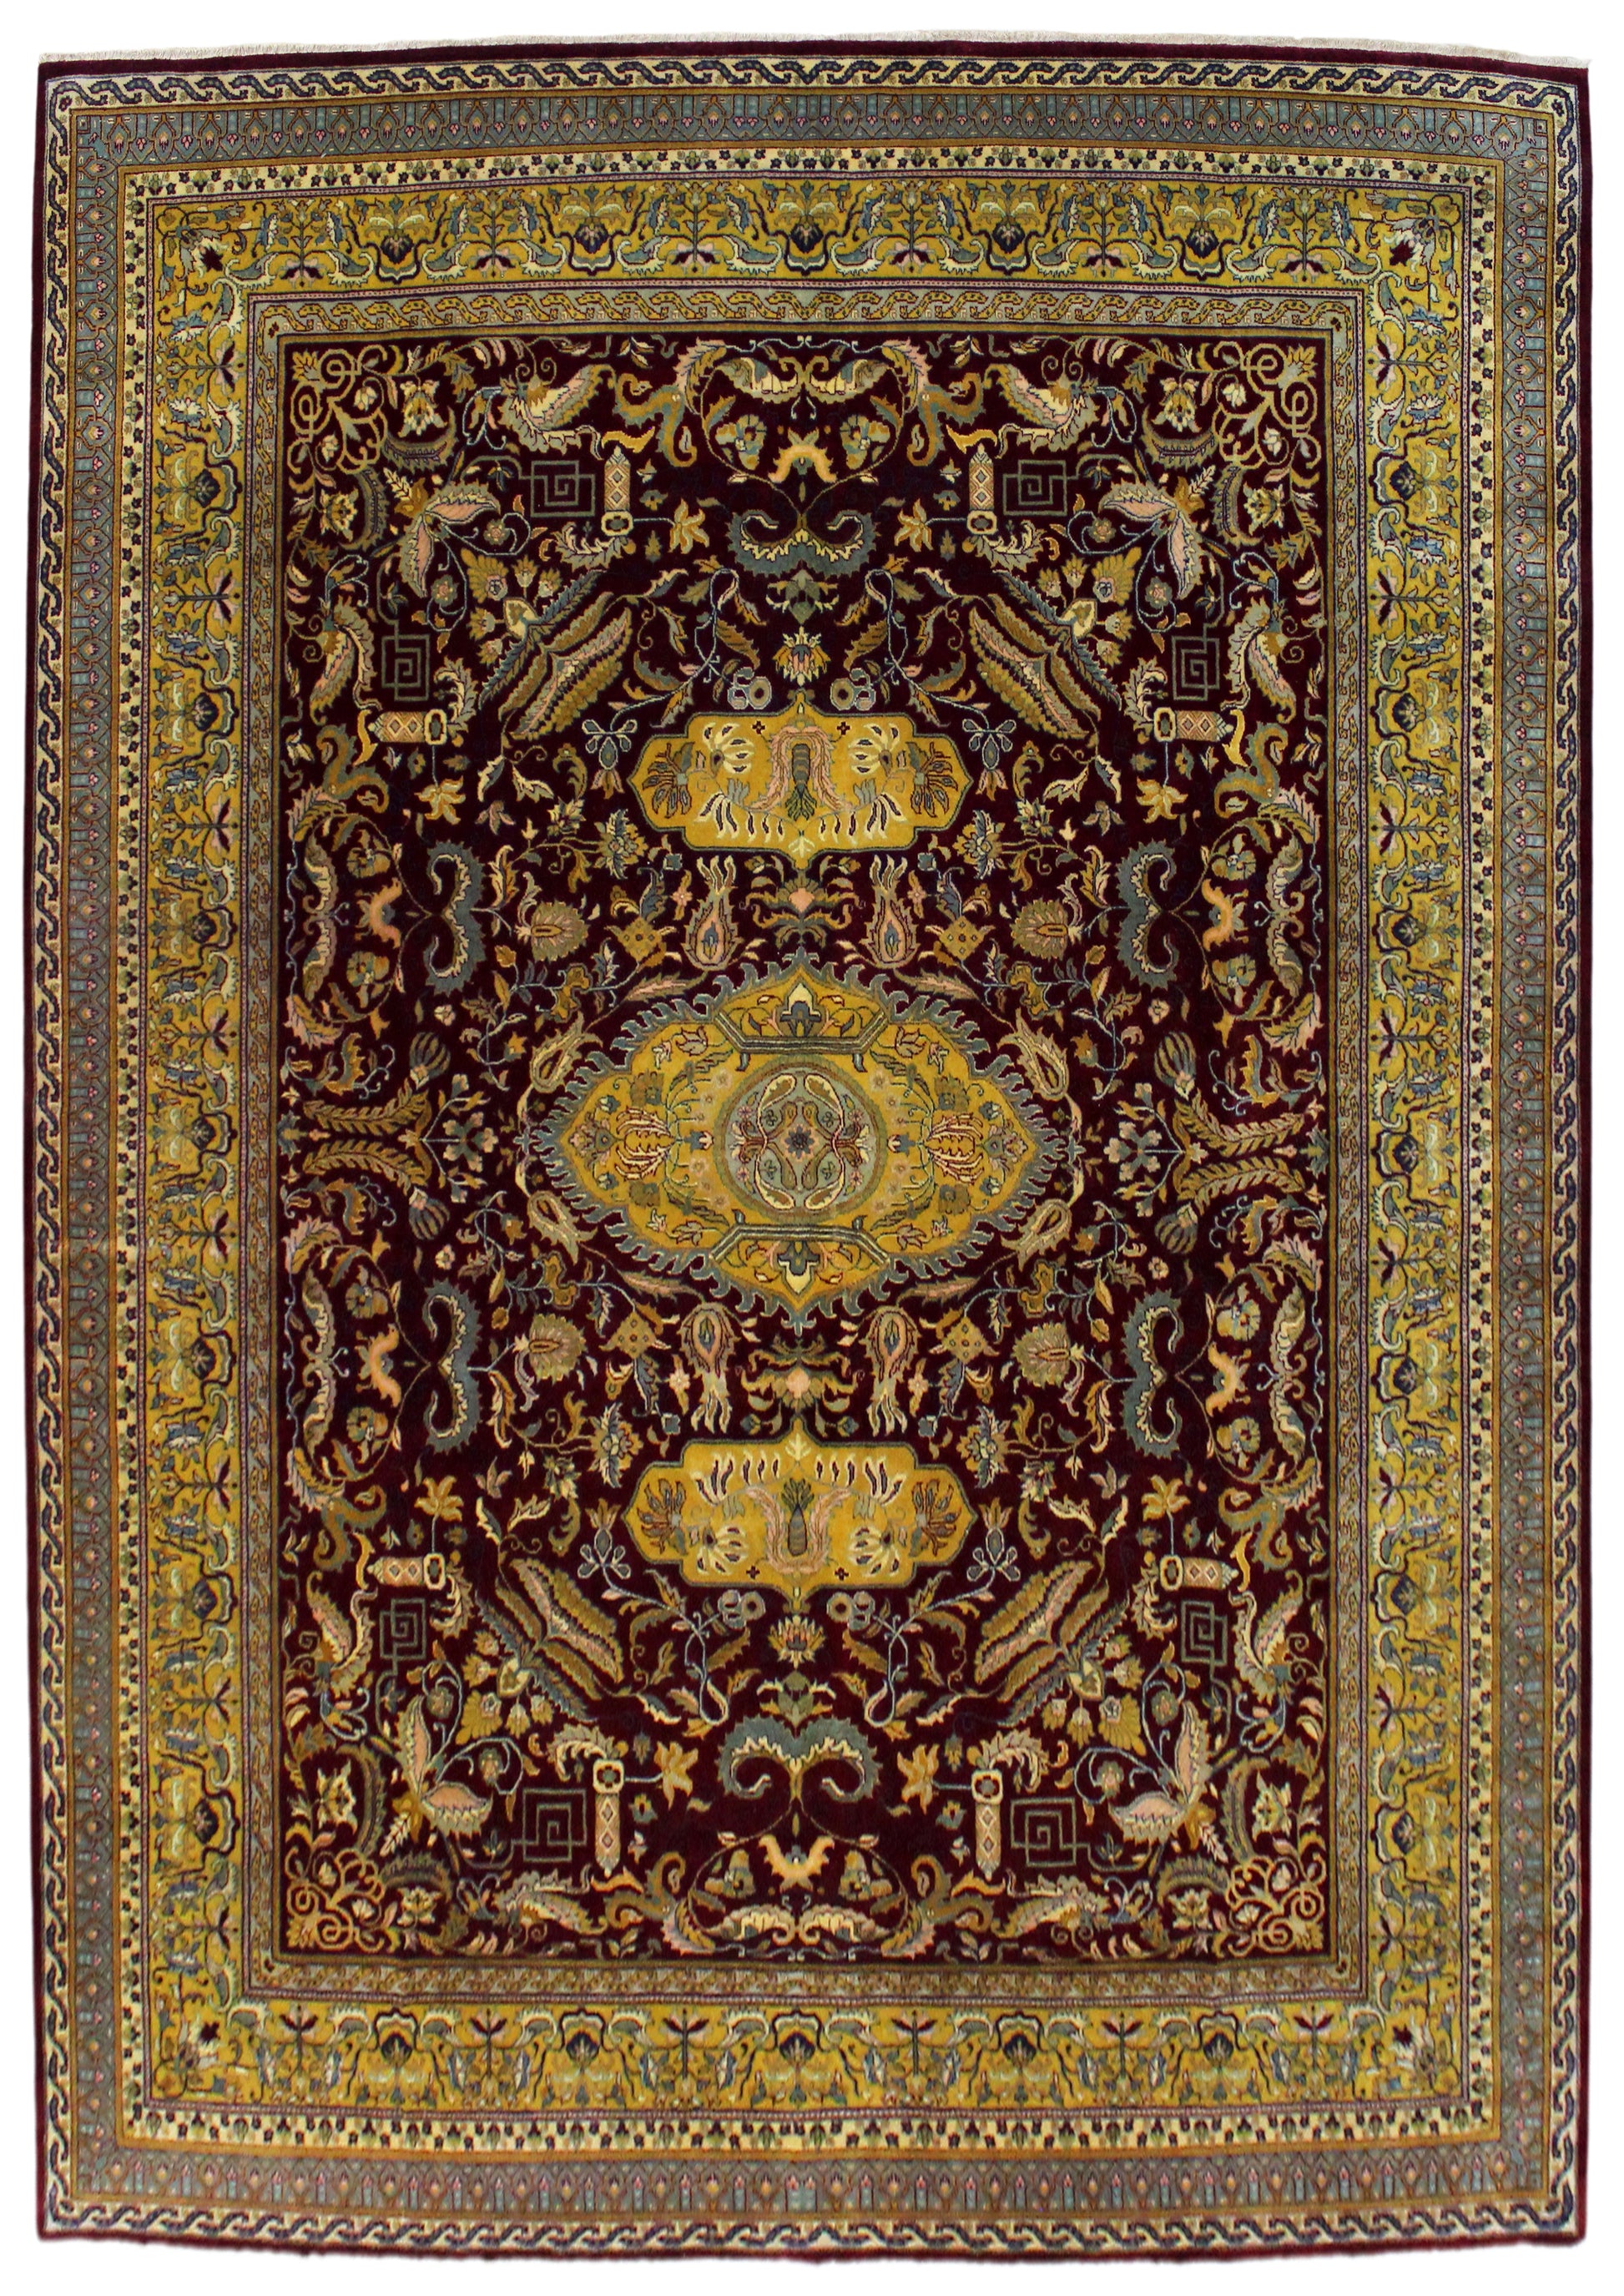 Sultanabad Area Rug 307cm x 241cm